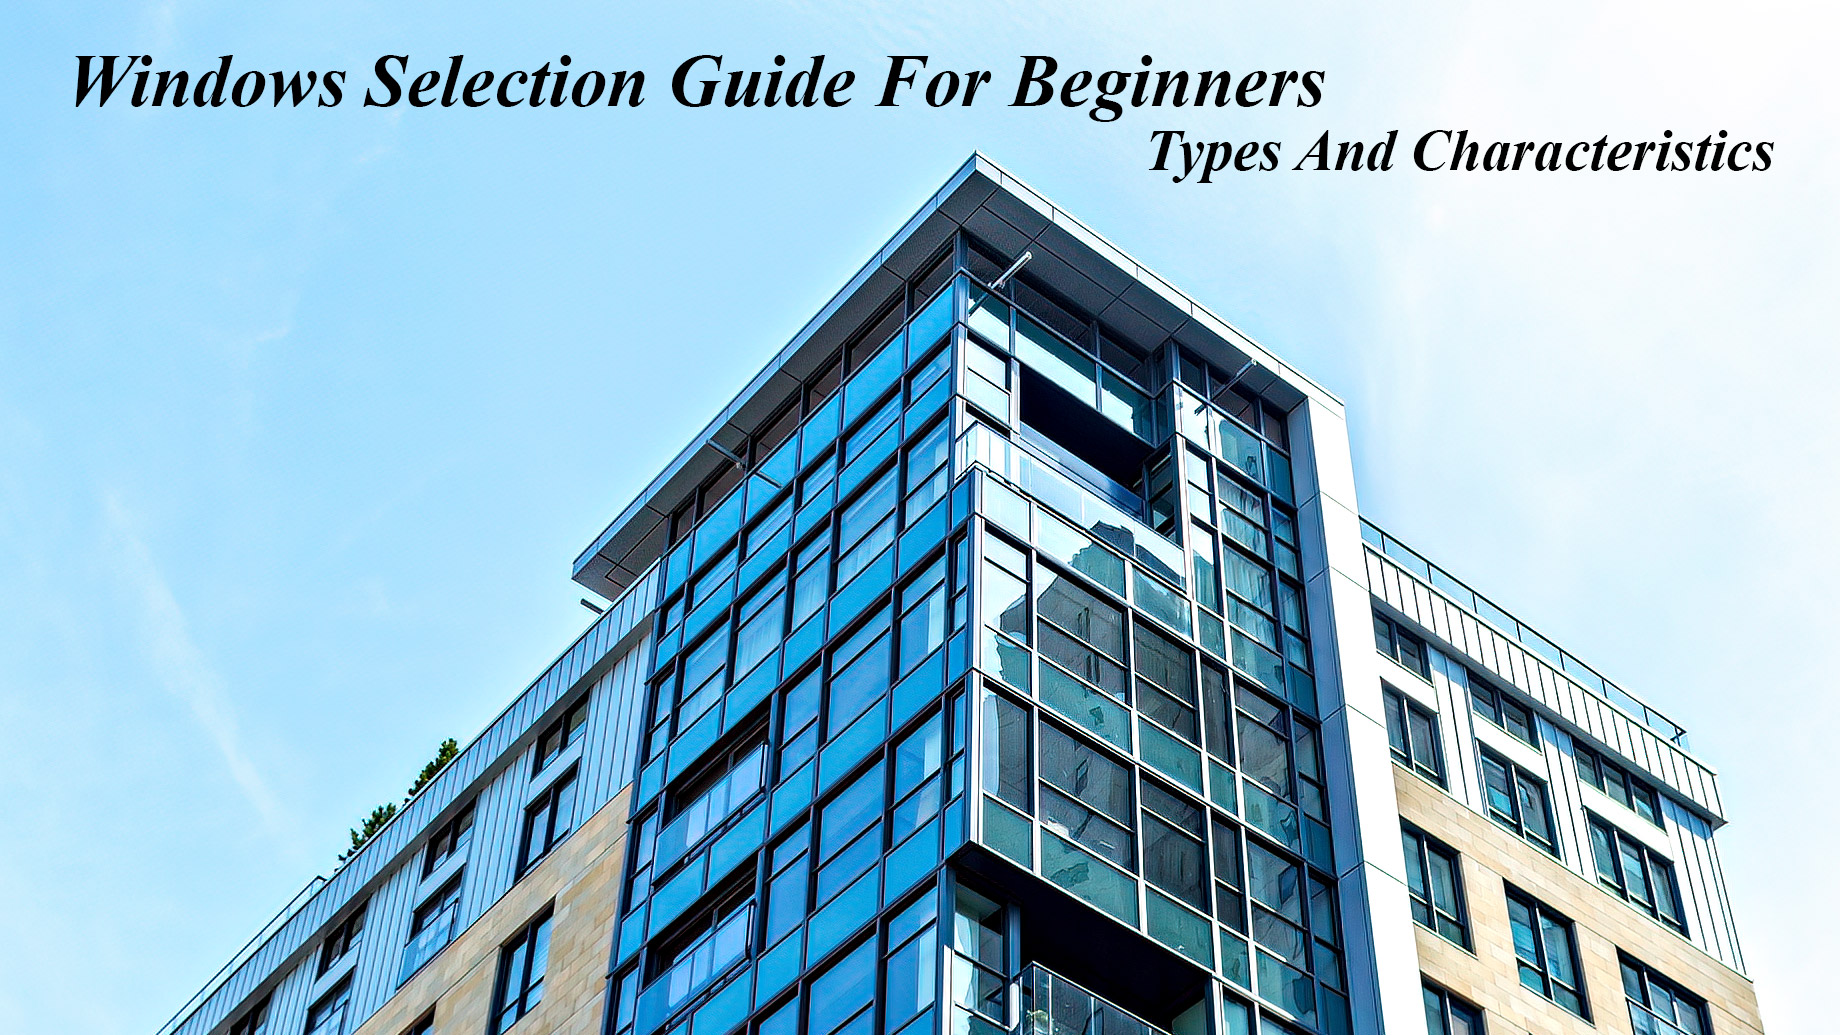 Windows Selection Guide For Beginners - Types And Characteristics